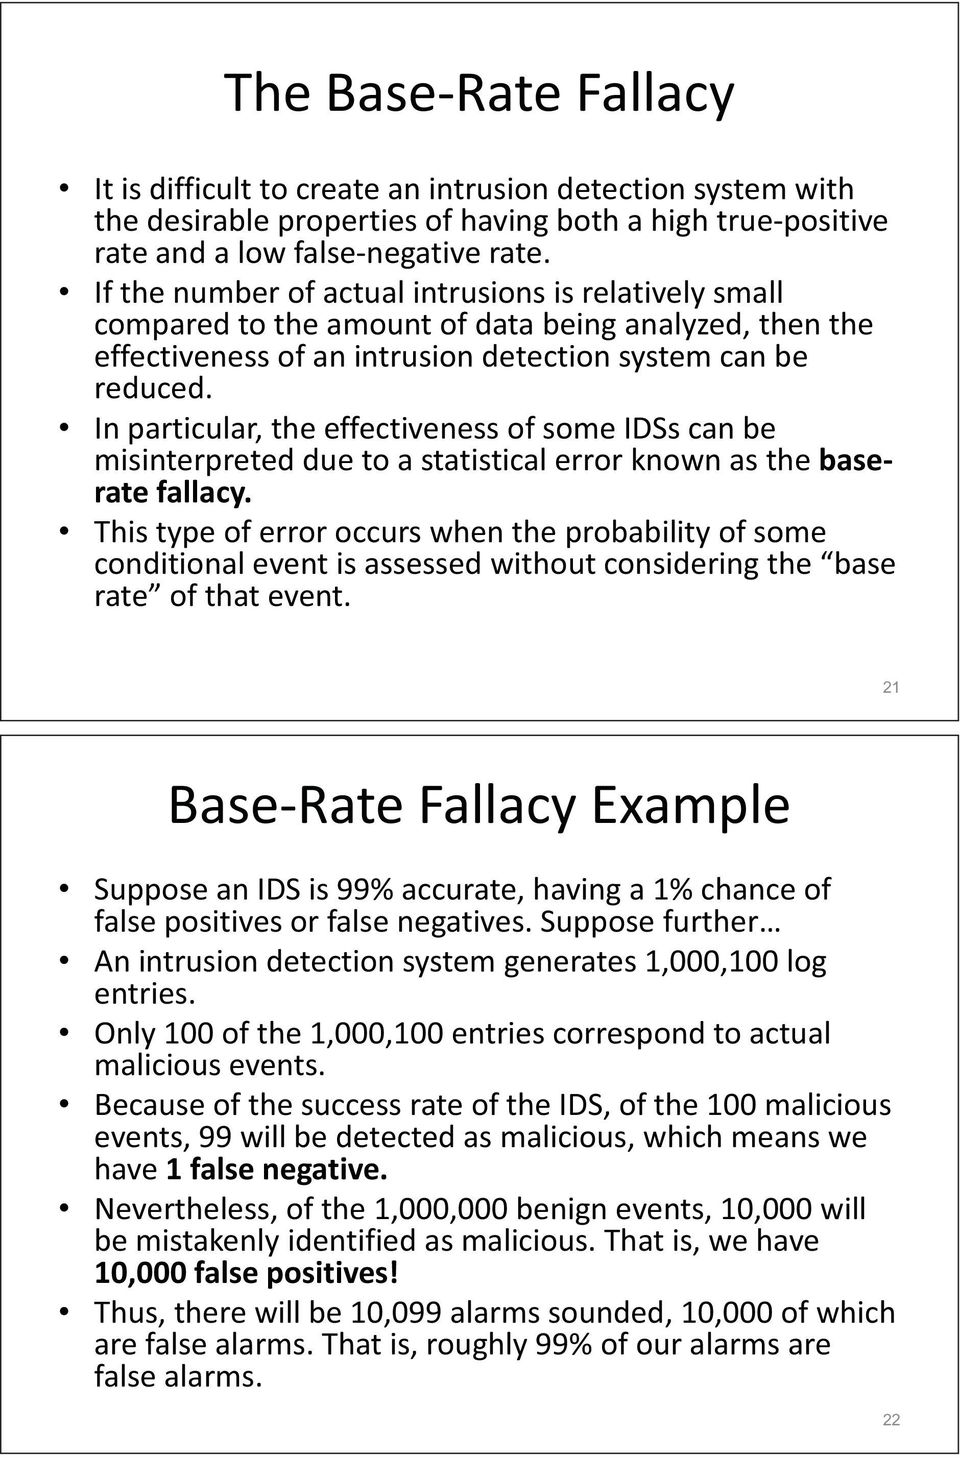 In particular, the effectiveness of some IDSs can be misinterpreted due to a statistical error known as the baserate fallacy.